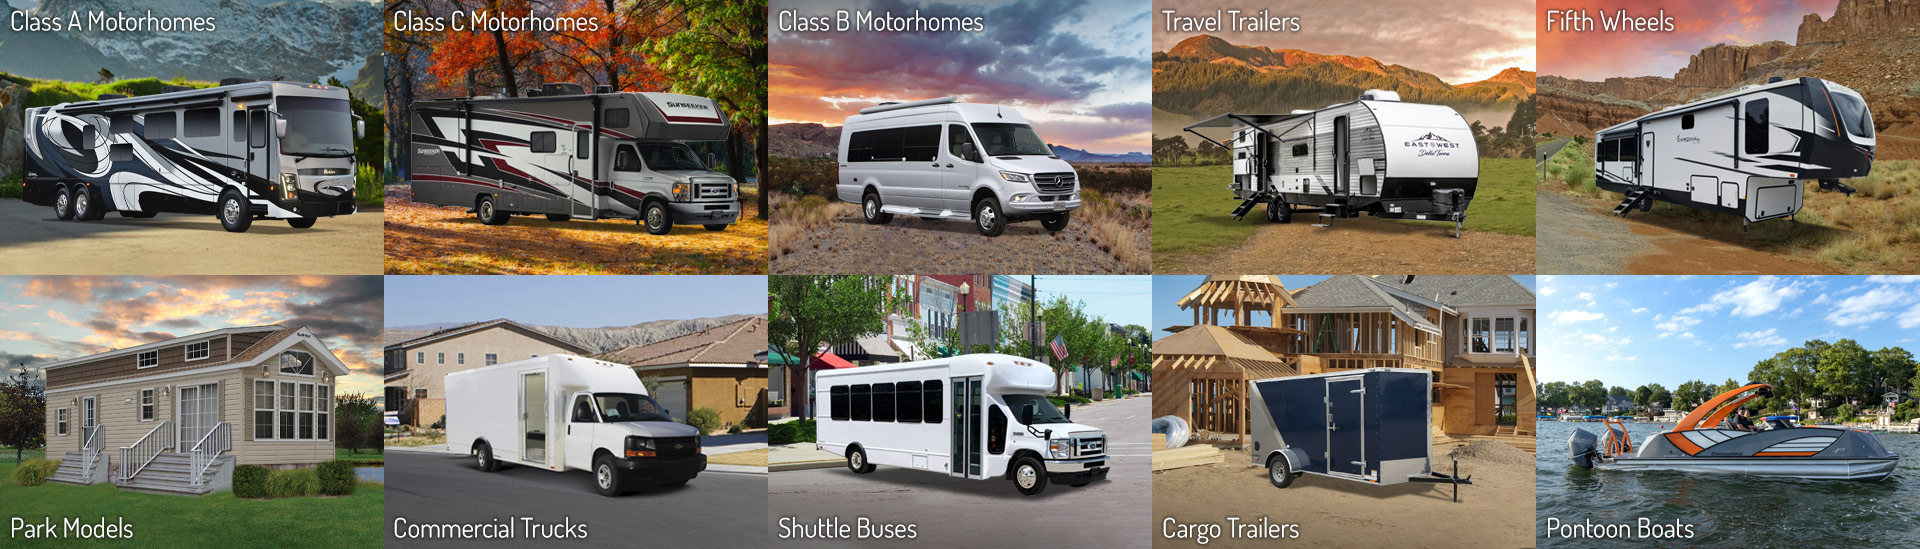 10 exterior shots of the types of products we manufacture. Row 1: Class A motorhomes, Class C motorhomes, Class B Motorhomes, Travel Trailers and Fifth Wheels. Row 2: Park models, Commercial Trucks, Shuttle Buses, Cargo Trailers and Pontoon Boats